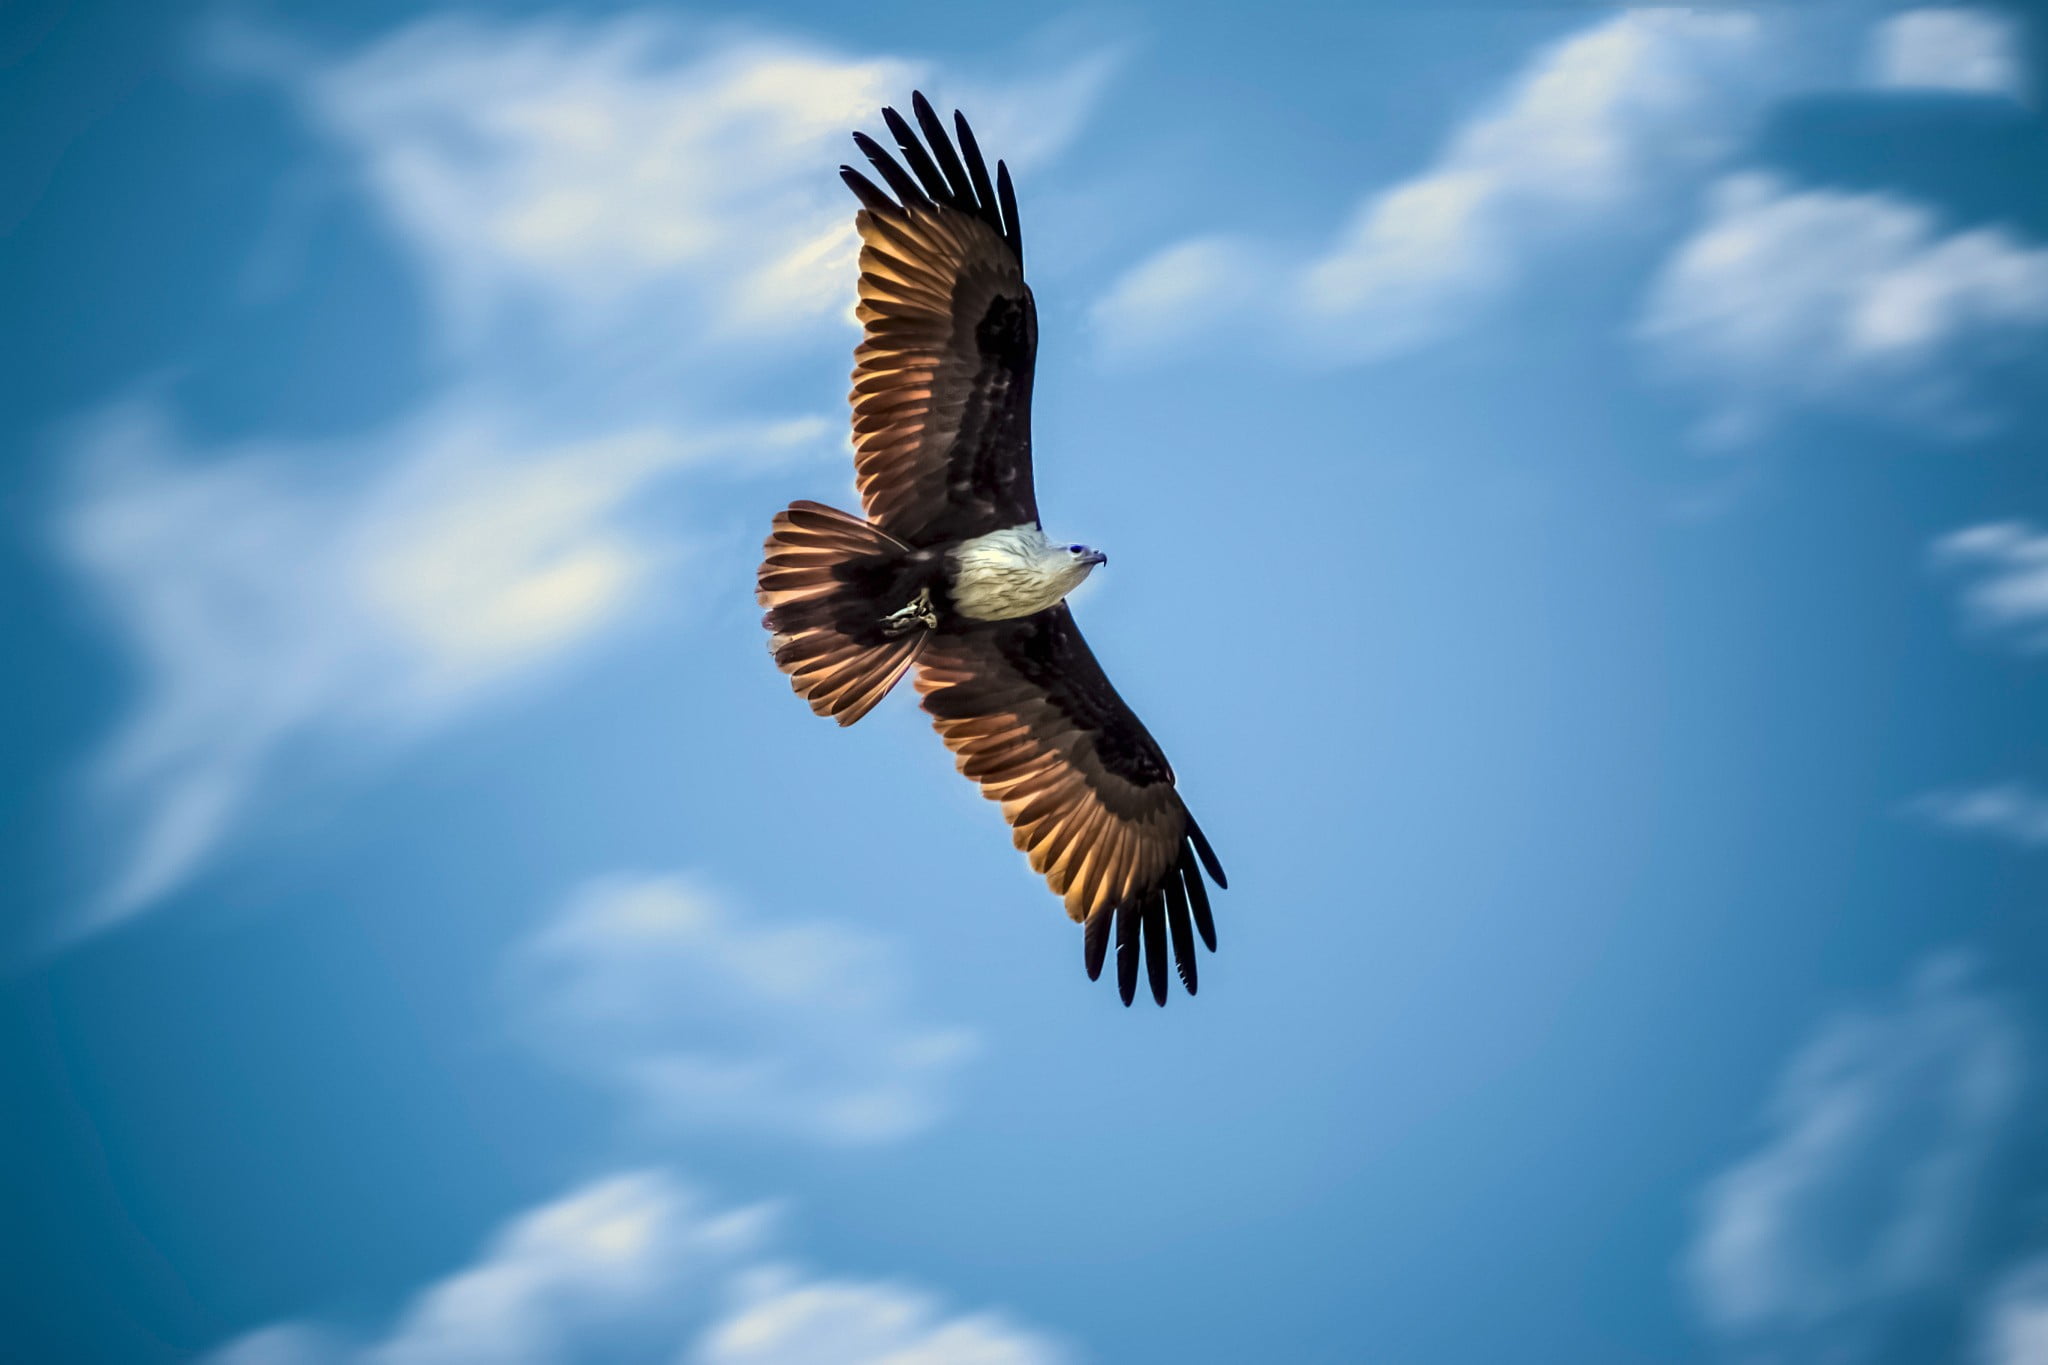 Flying Eagle Wallpapers